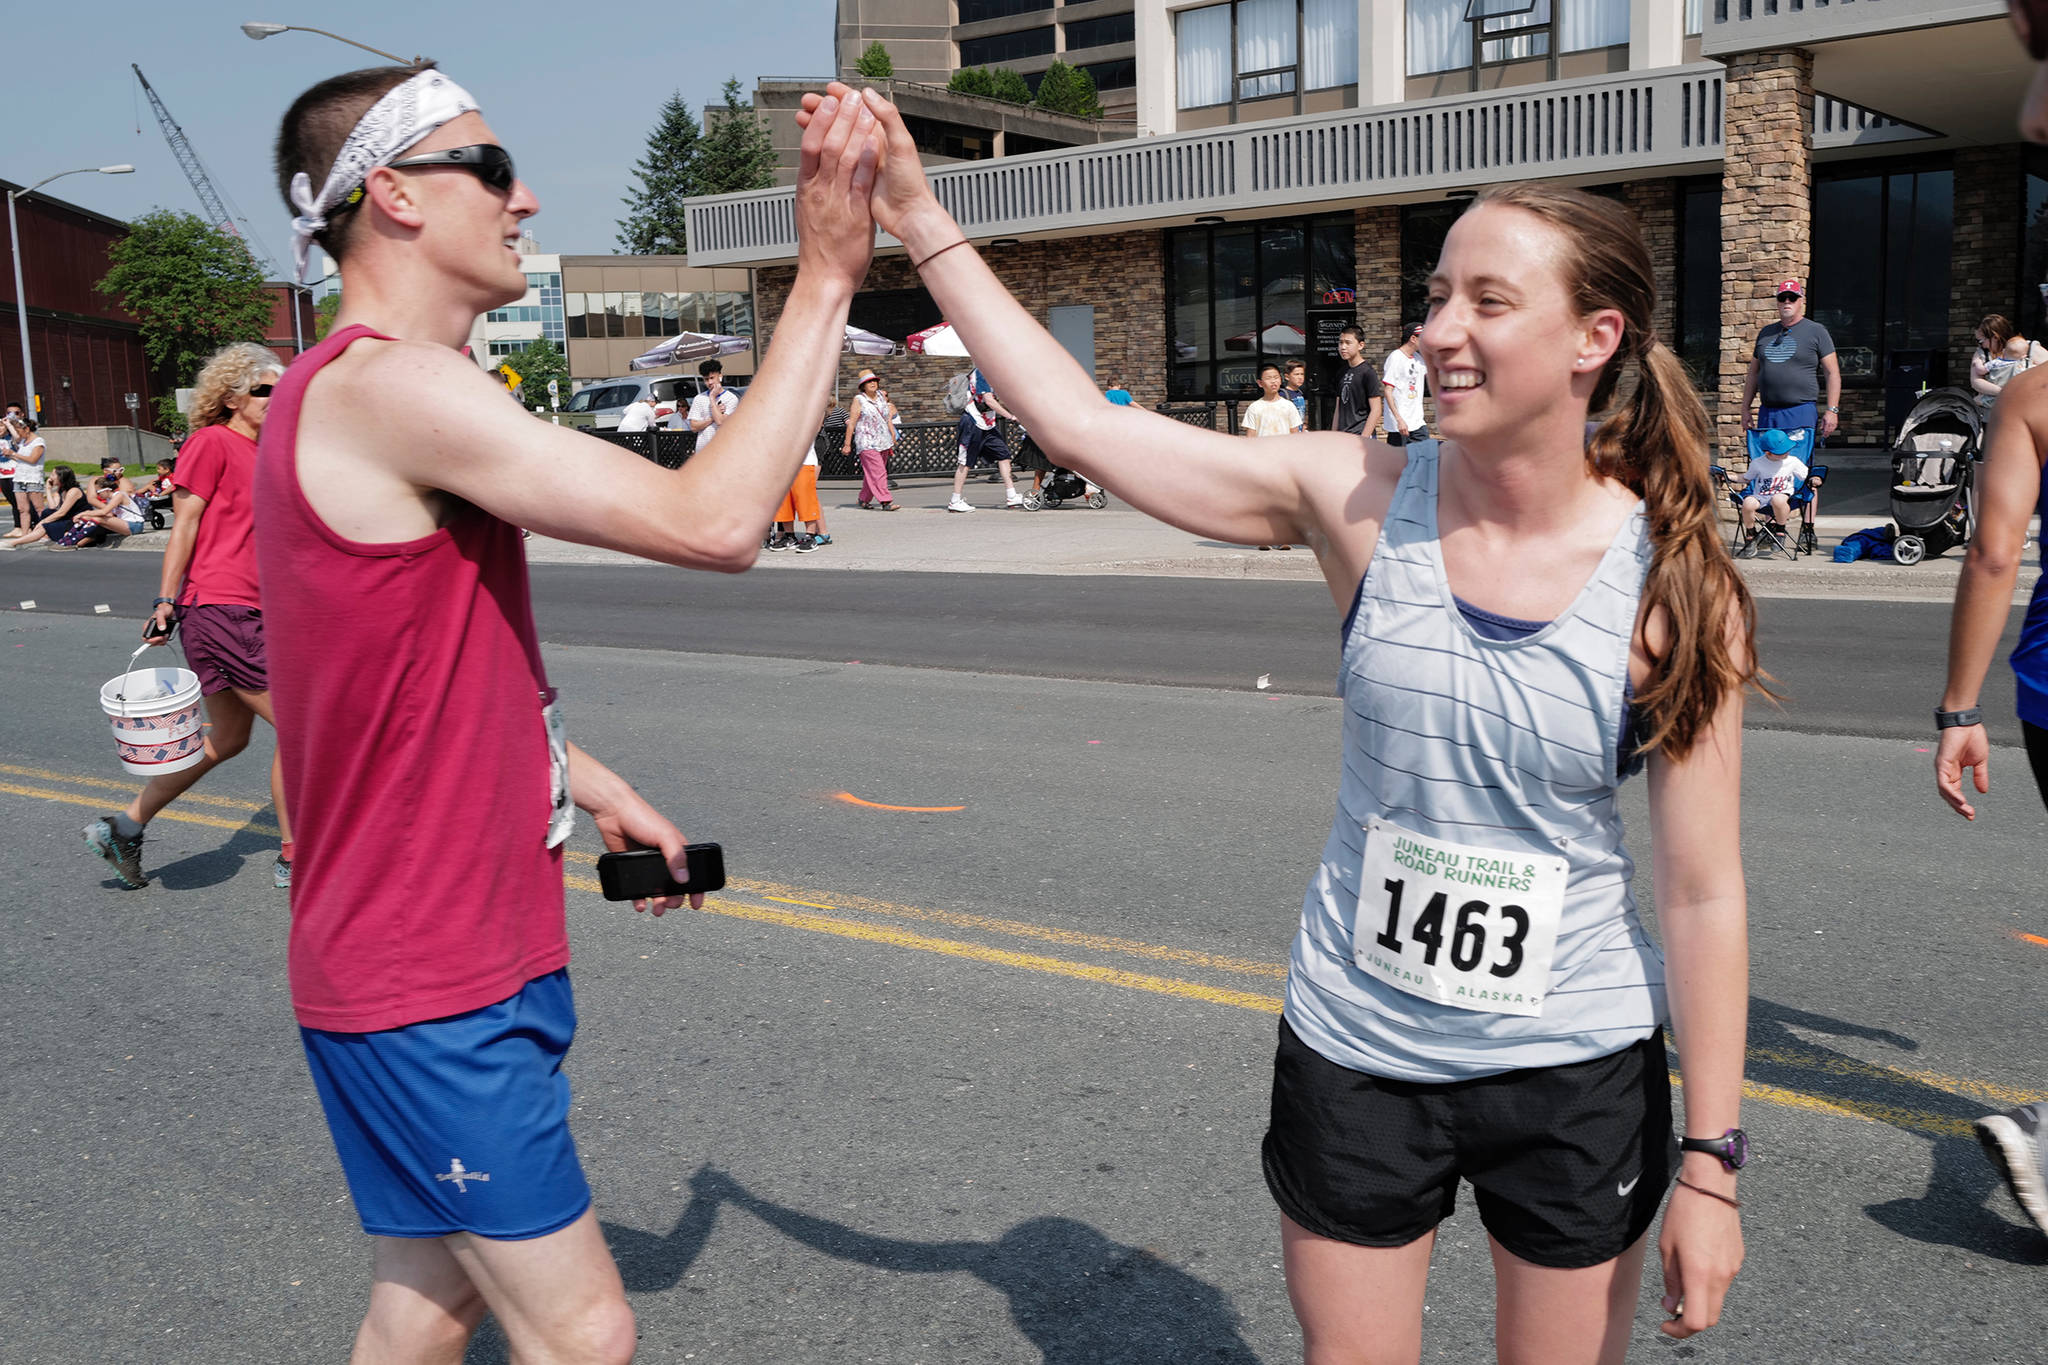 Beth Gollin, right, receives a high five from Drew Stafford after she was the first woman to finish the Glenn Frick Memorial Mile on Thursday, July 4, 2019. (Michael Penn | Juneau Empire)